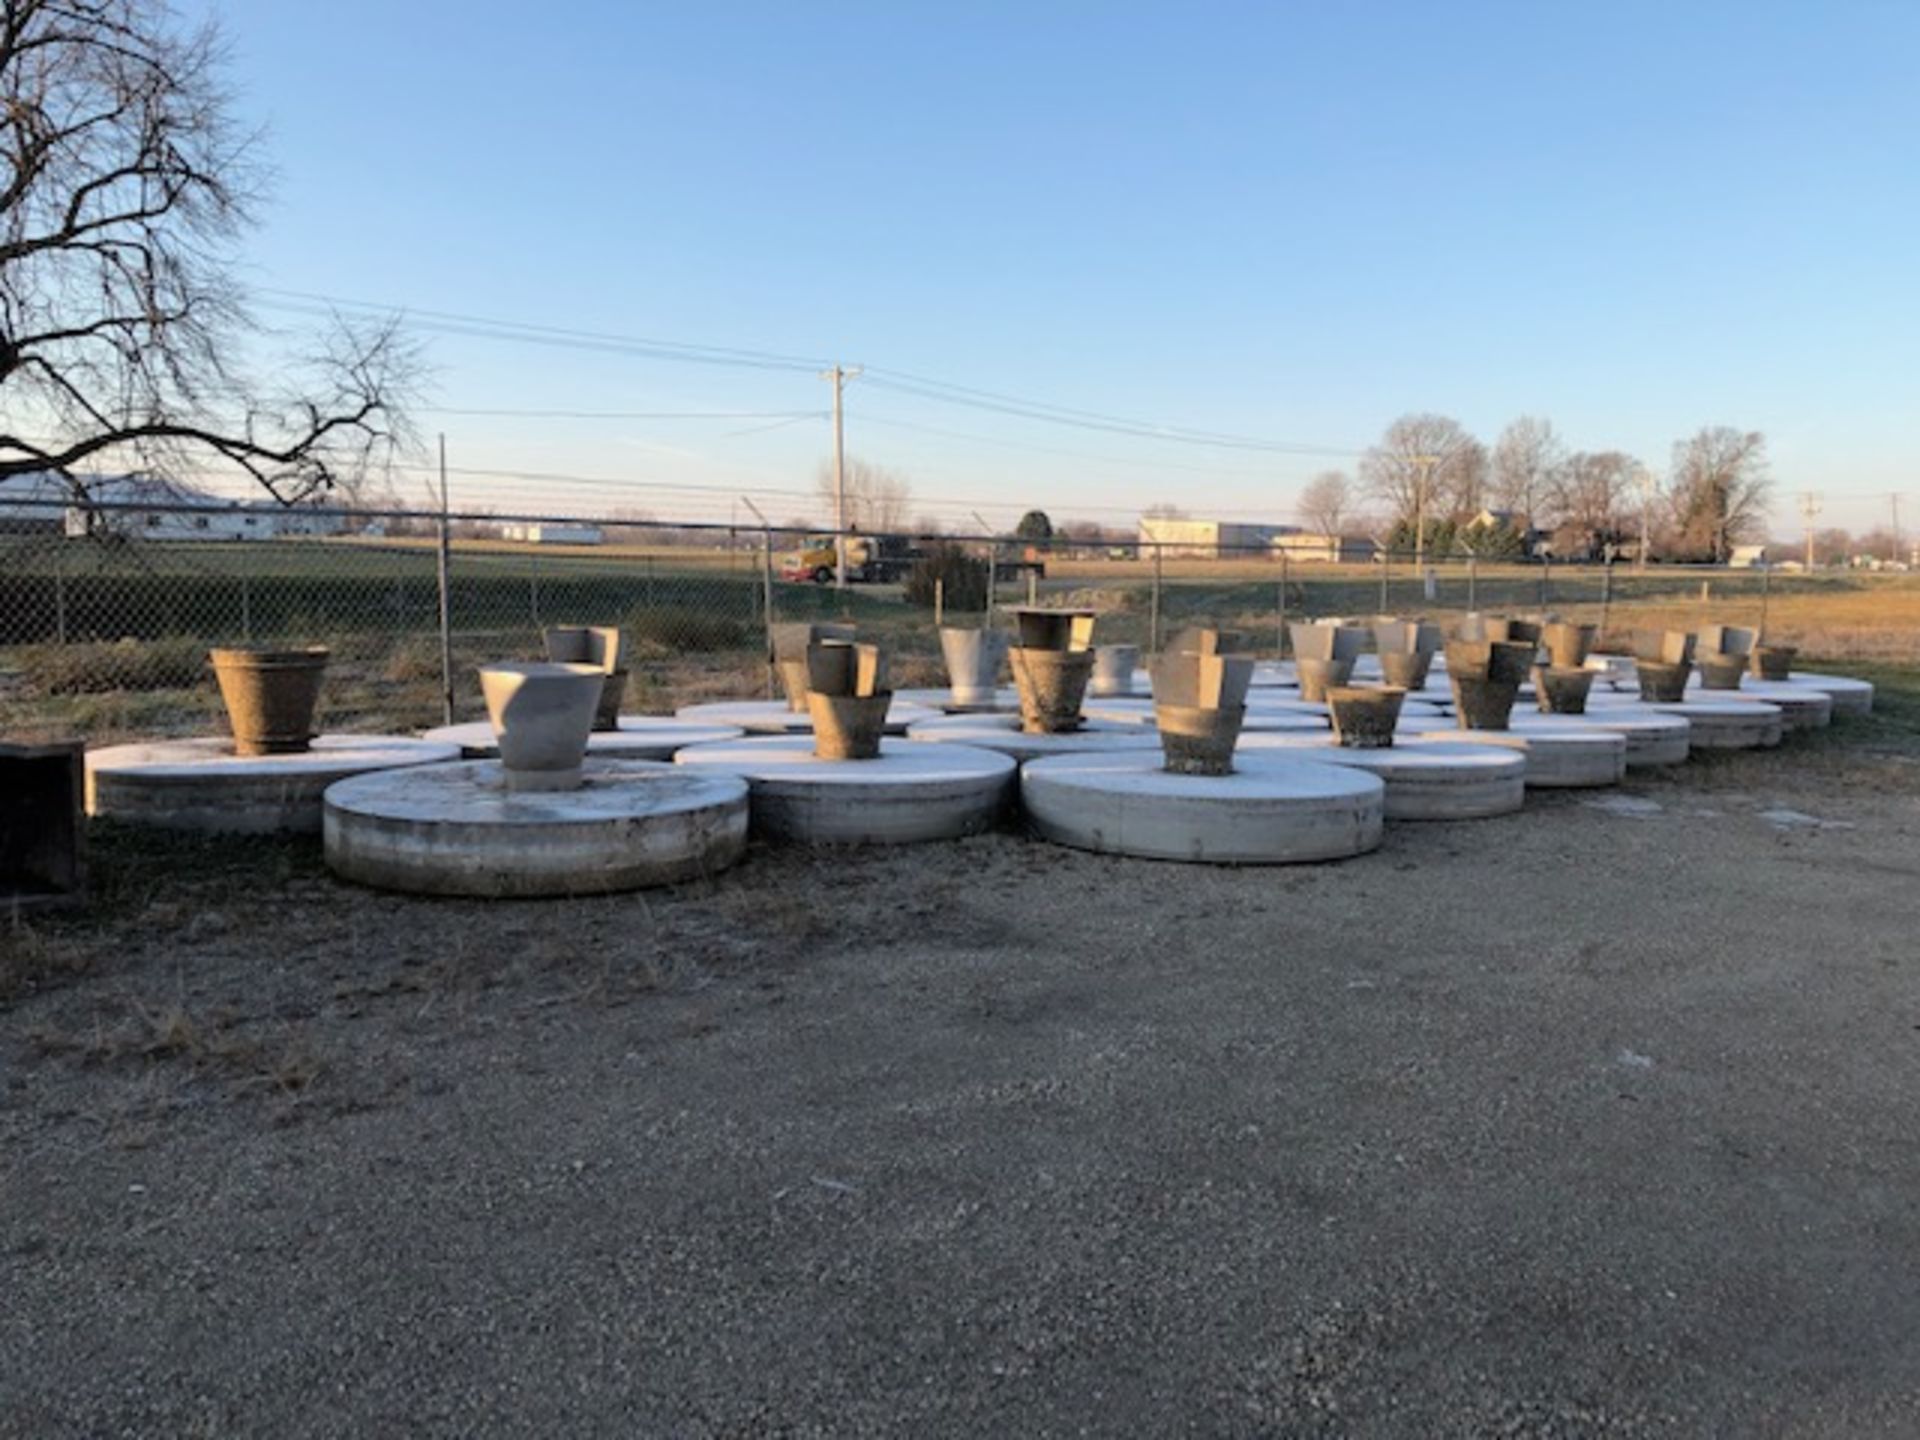 (Located in Mendota, IL) Lot of 13 Aqua Aeration Systems Aerators Model 4202517 on S/S Floats with 2